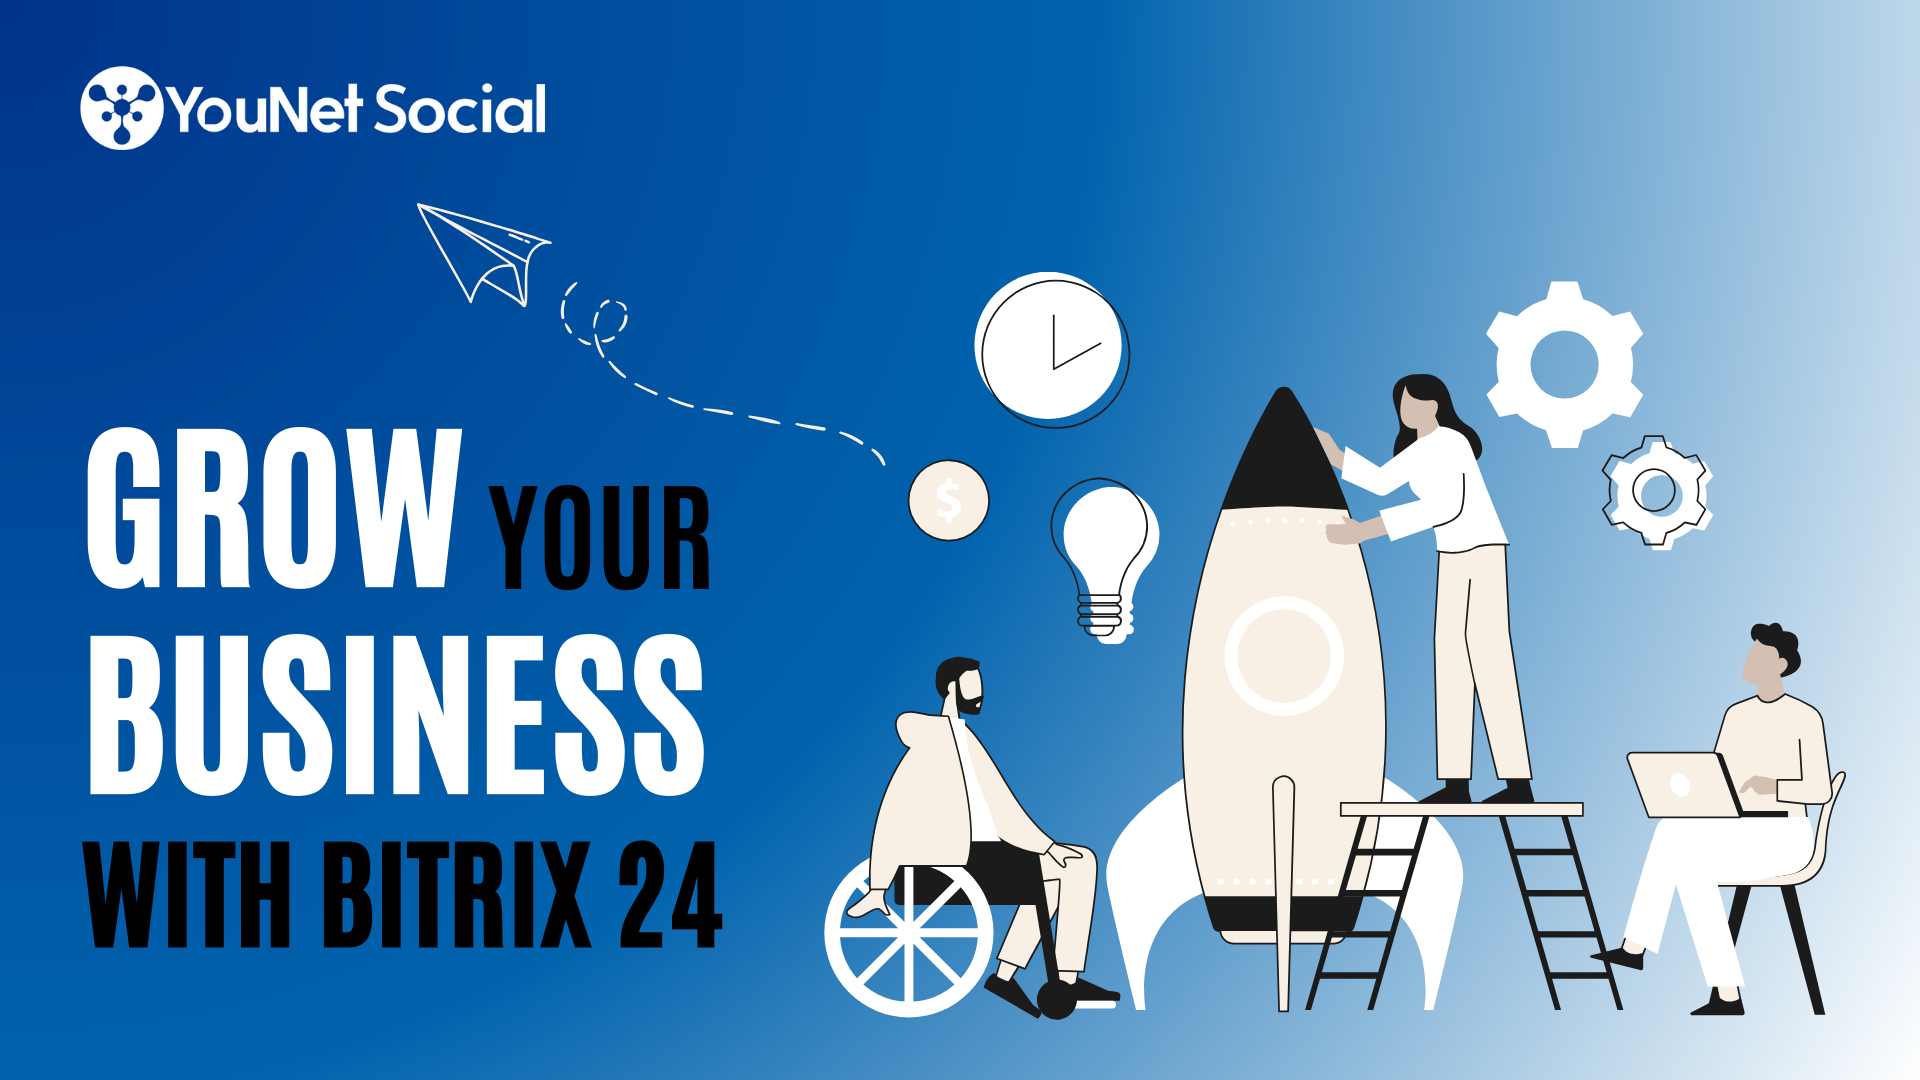 Engage Your Business with a Trusted Bitrix24 CRM Partner